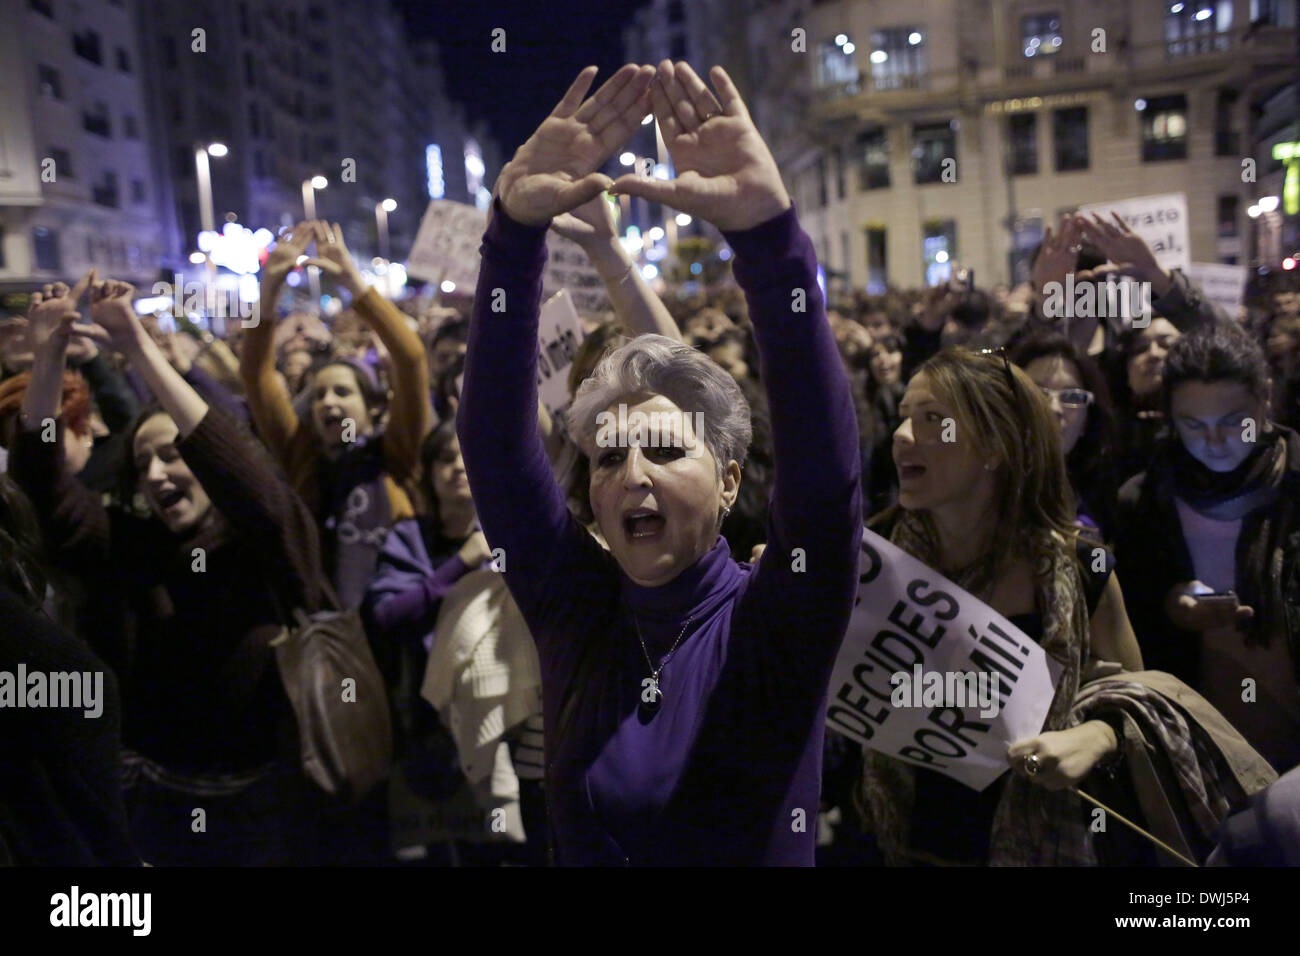 Madrid, Spain. 8th Mar, 2014. Protestors shout slogans during a protest against the Spanish government's plans to implement major restrictions on abortion in Madrid, Spain, March, Saturday, 8th, 2014. The reform of the abortion law and gender violence have led the massive marches held in a dozen cities in Spain to mark the International Women's Day, women collectives have also denounced the high pay gap between men and women and the elimination of social rights. © Rodrigo Garcia/NurPhoto/ZUMAPRESS.com/Alamy Live News Stock Photo